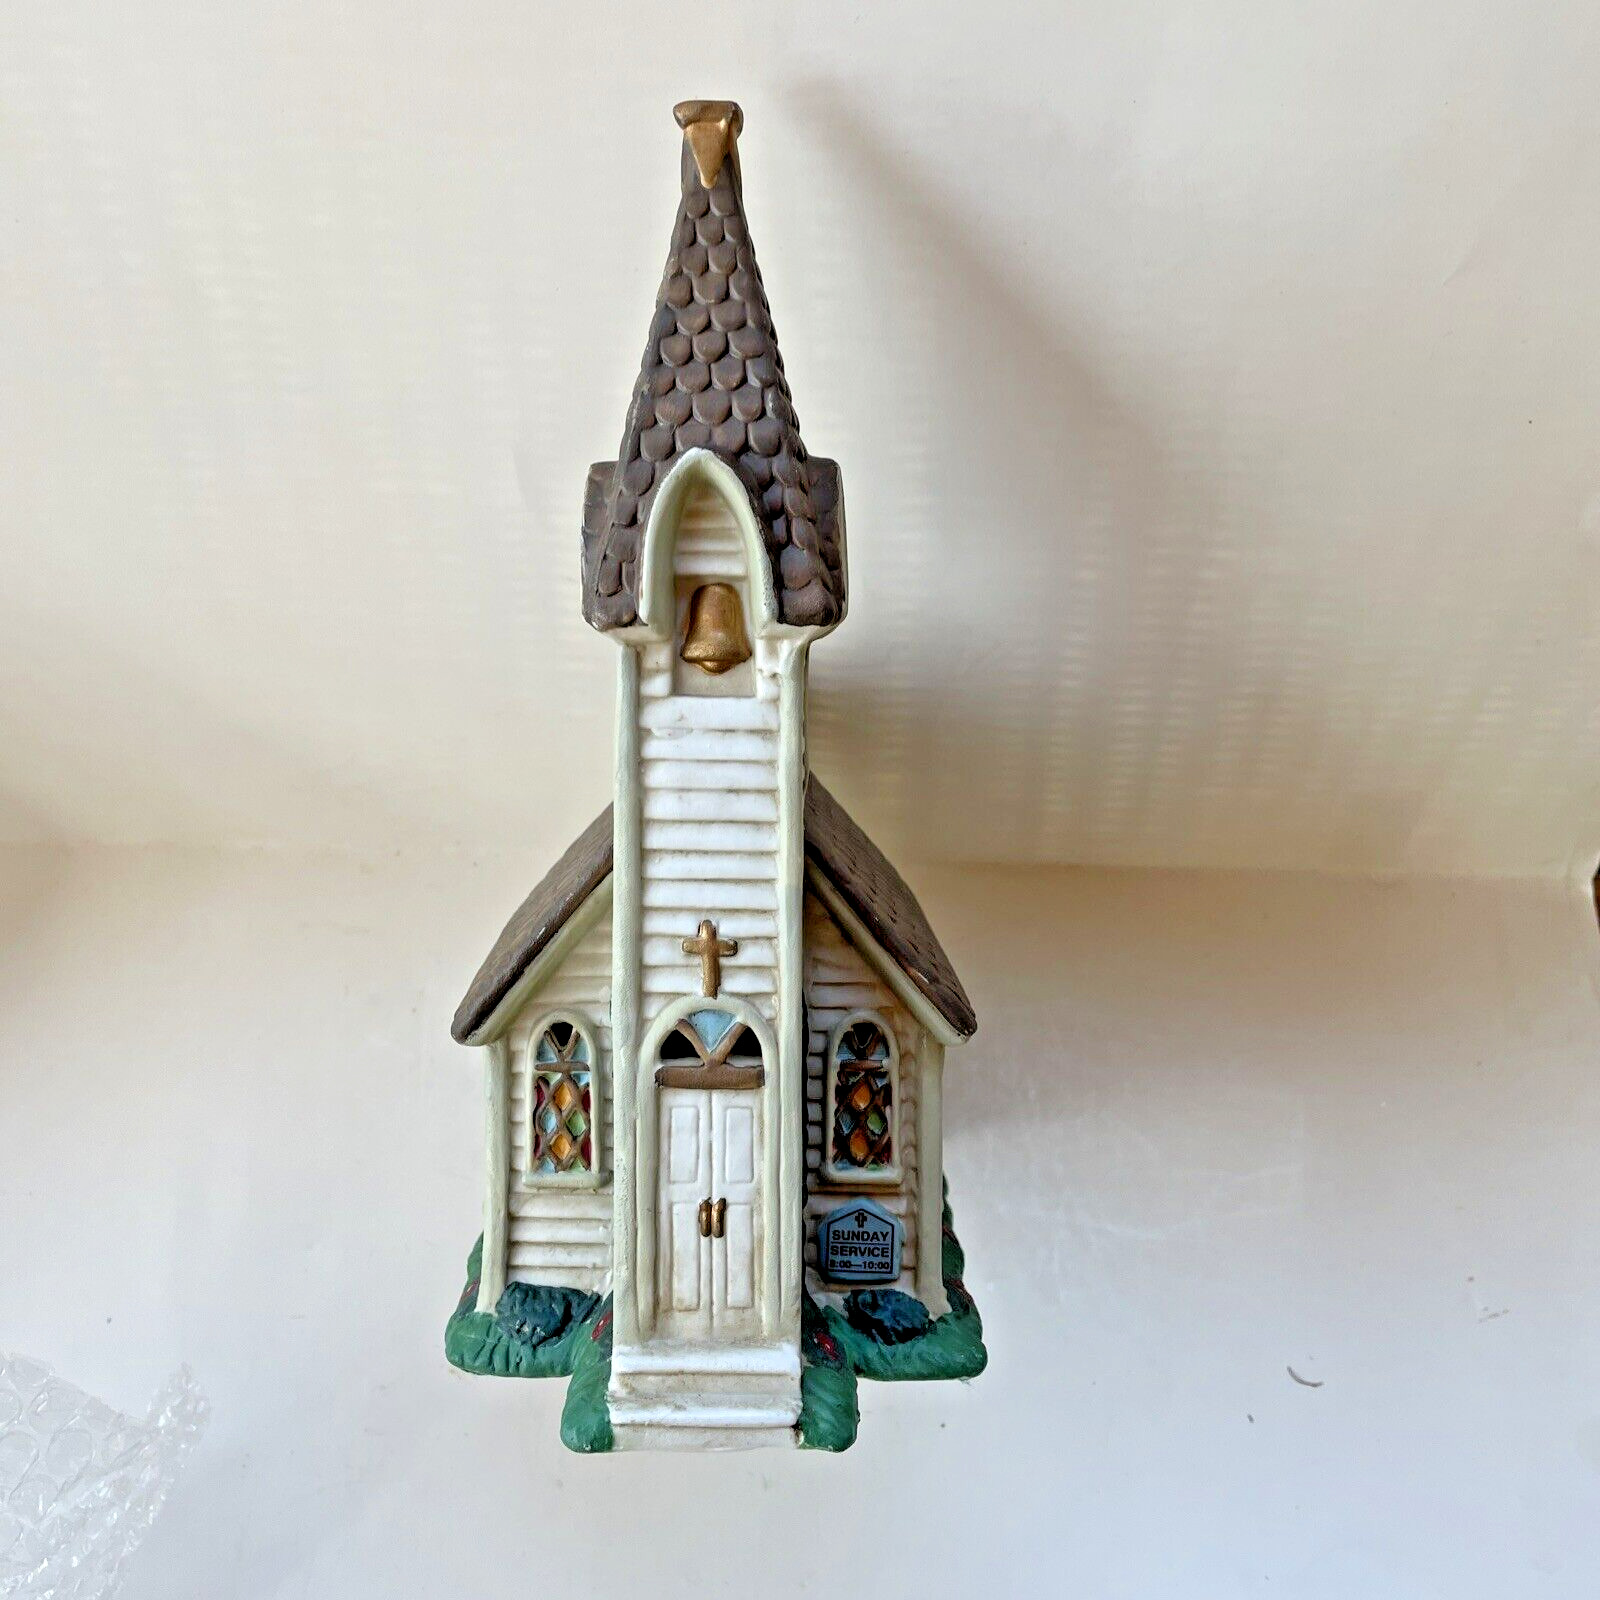 Cannon Valley “Cannon Valley Church” Porcelain Lighted House NIB